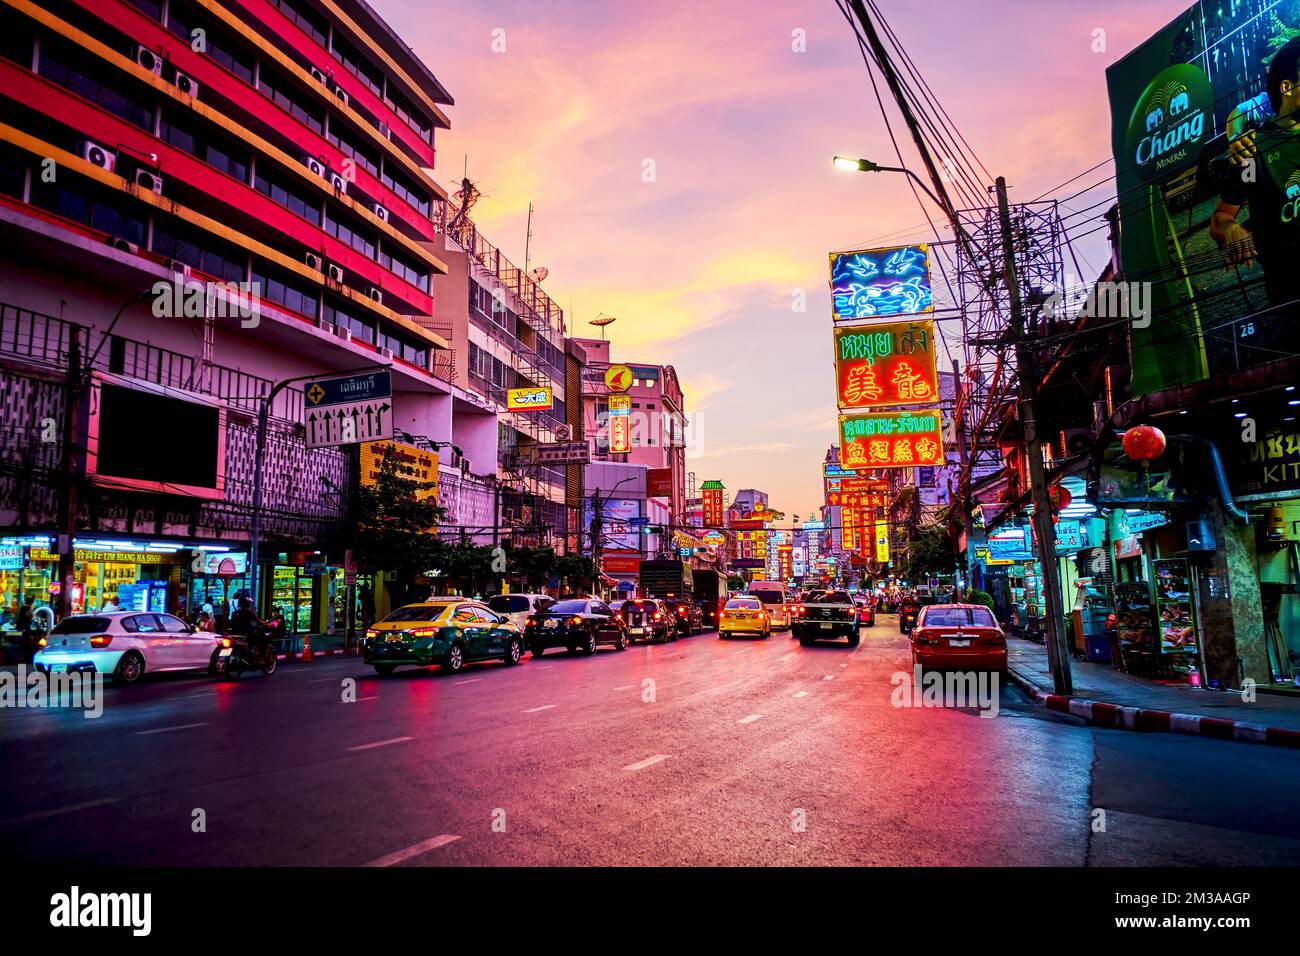 BANGKOK, THAILAND - APRIL 23, 2019: Late evening in Chinatown on Yaowarat Road with numerous bright signboards, showcases and driving cars, on April 2 Stock Photo